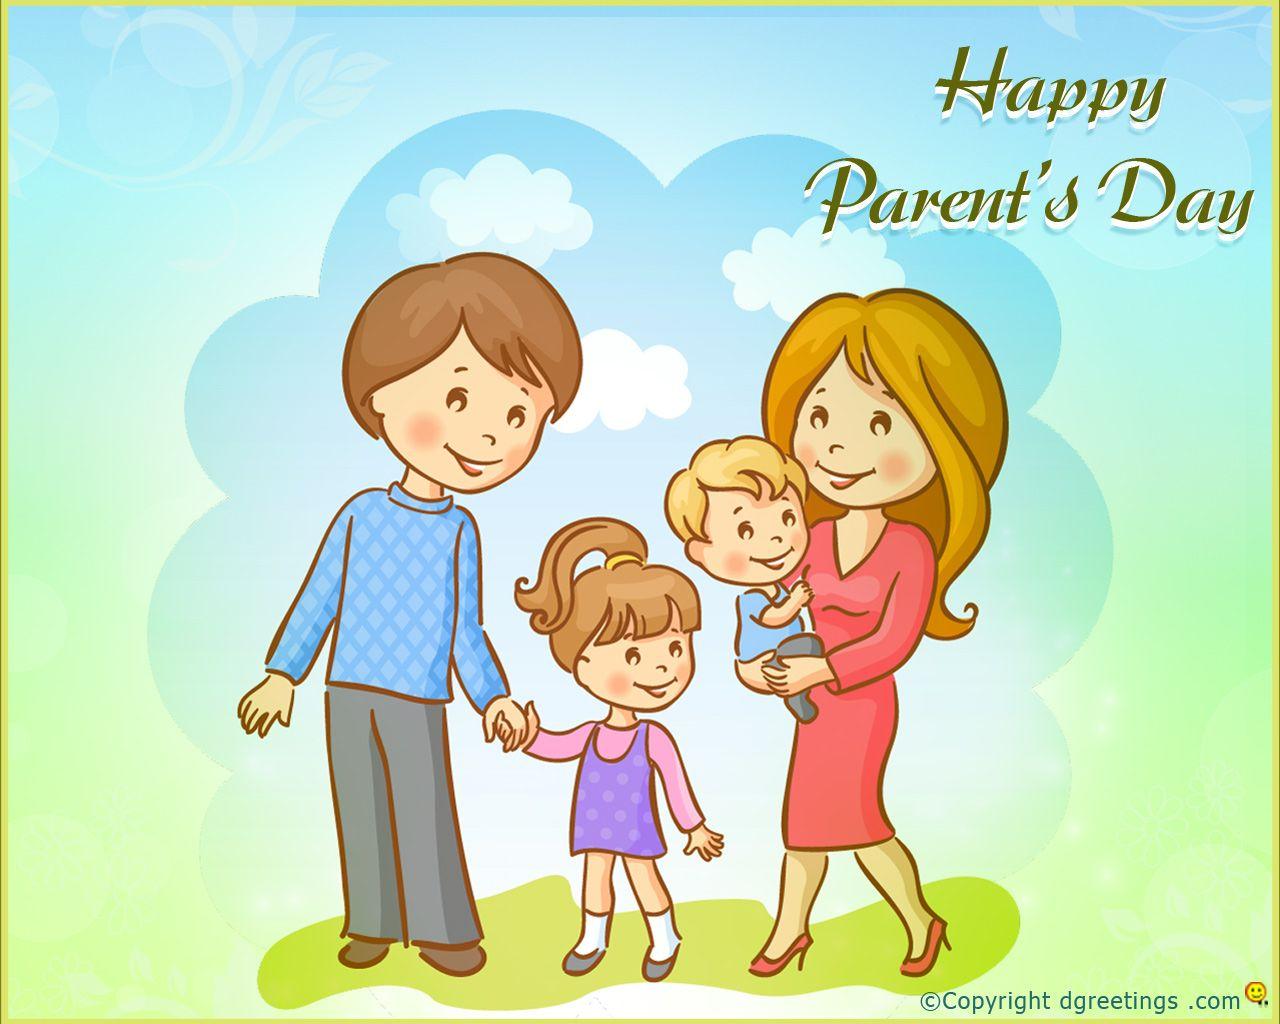 Happy parents day Wallpaper – Greetings Wishes Wallpaper